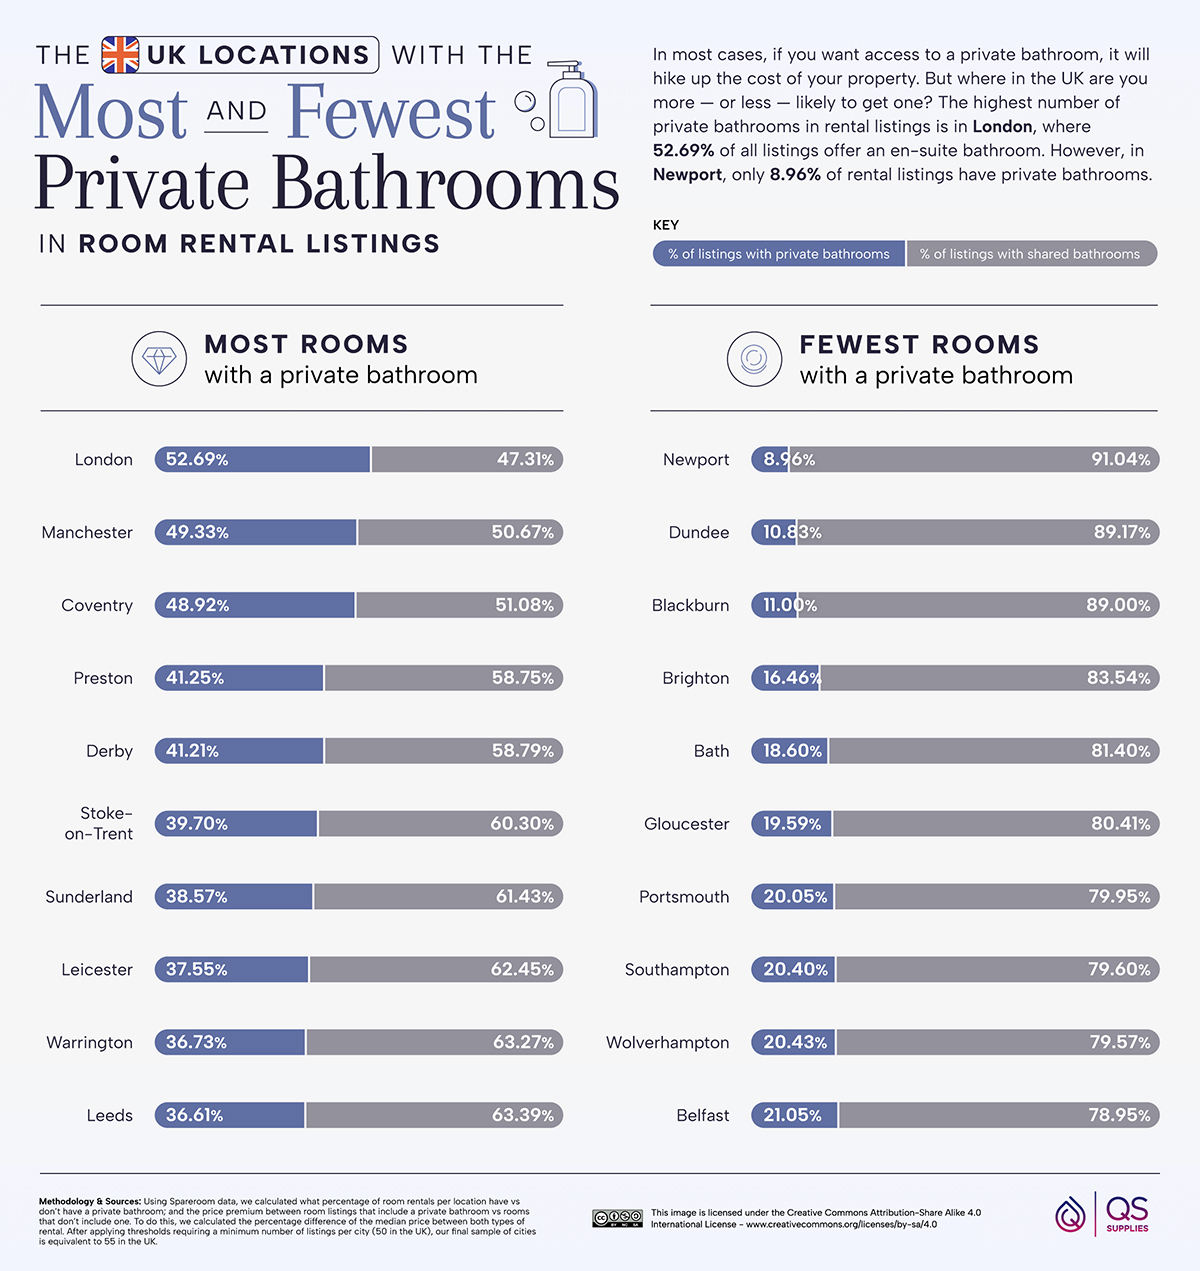 UK Locations With Most and Fewest Private Bathrooms